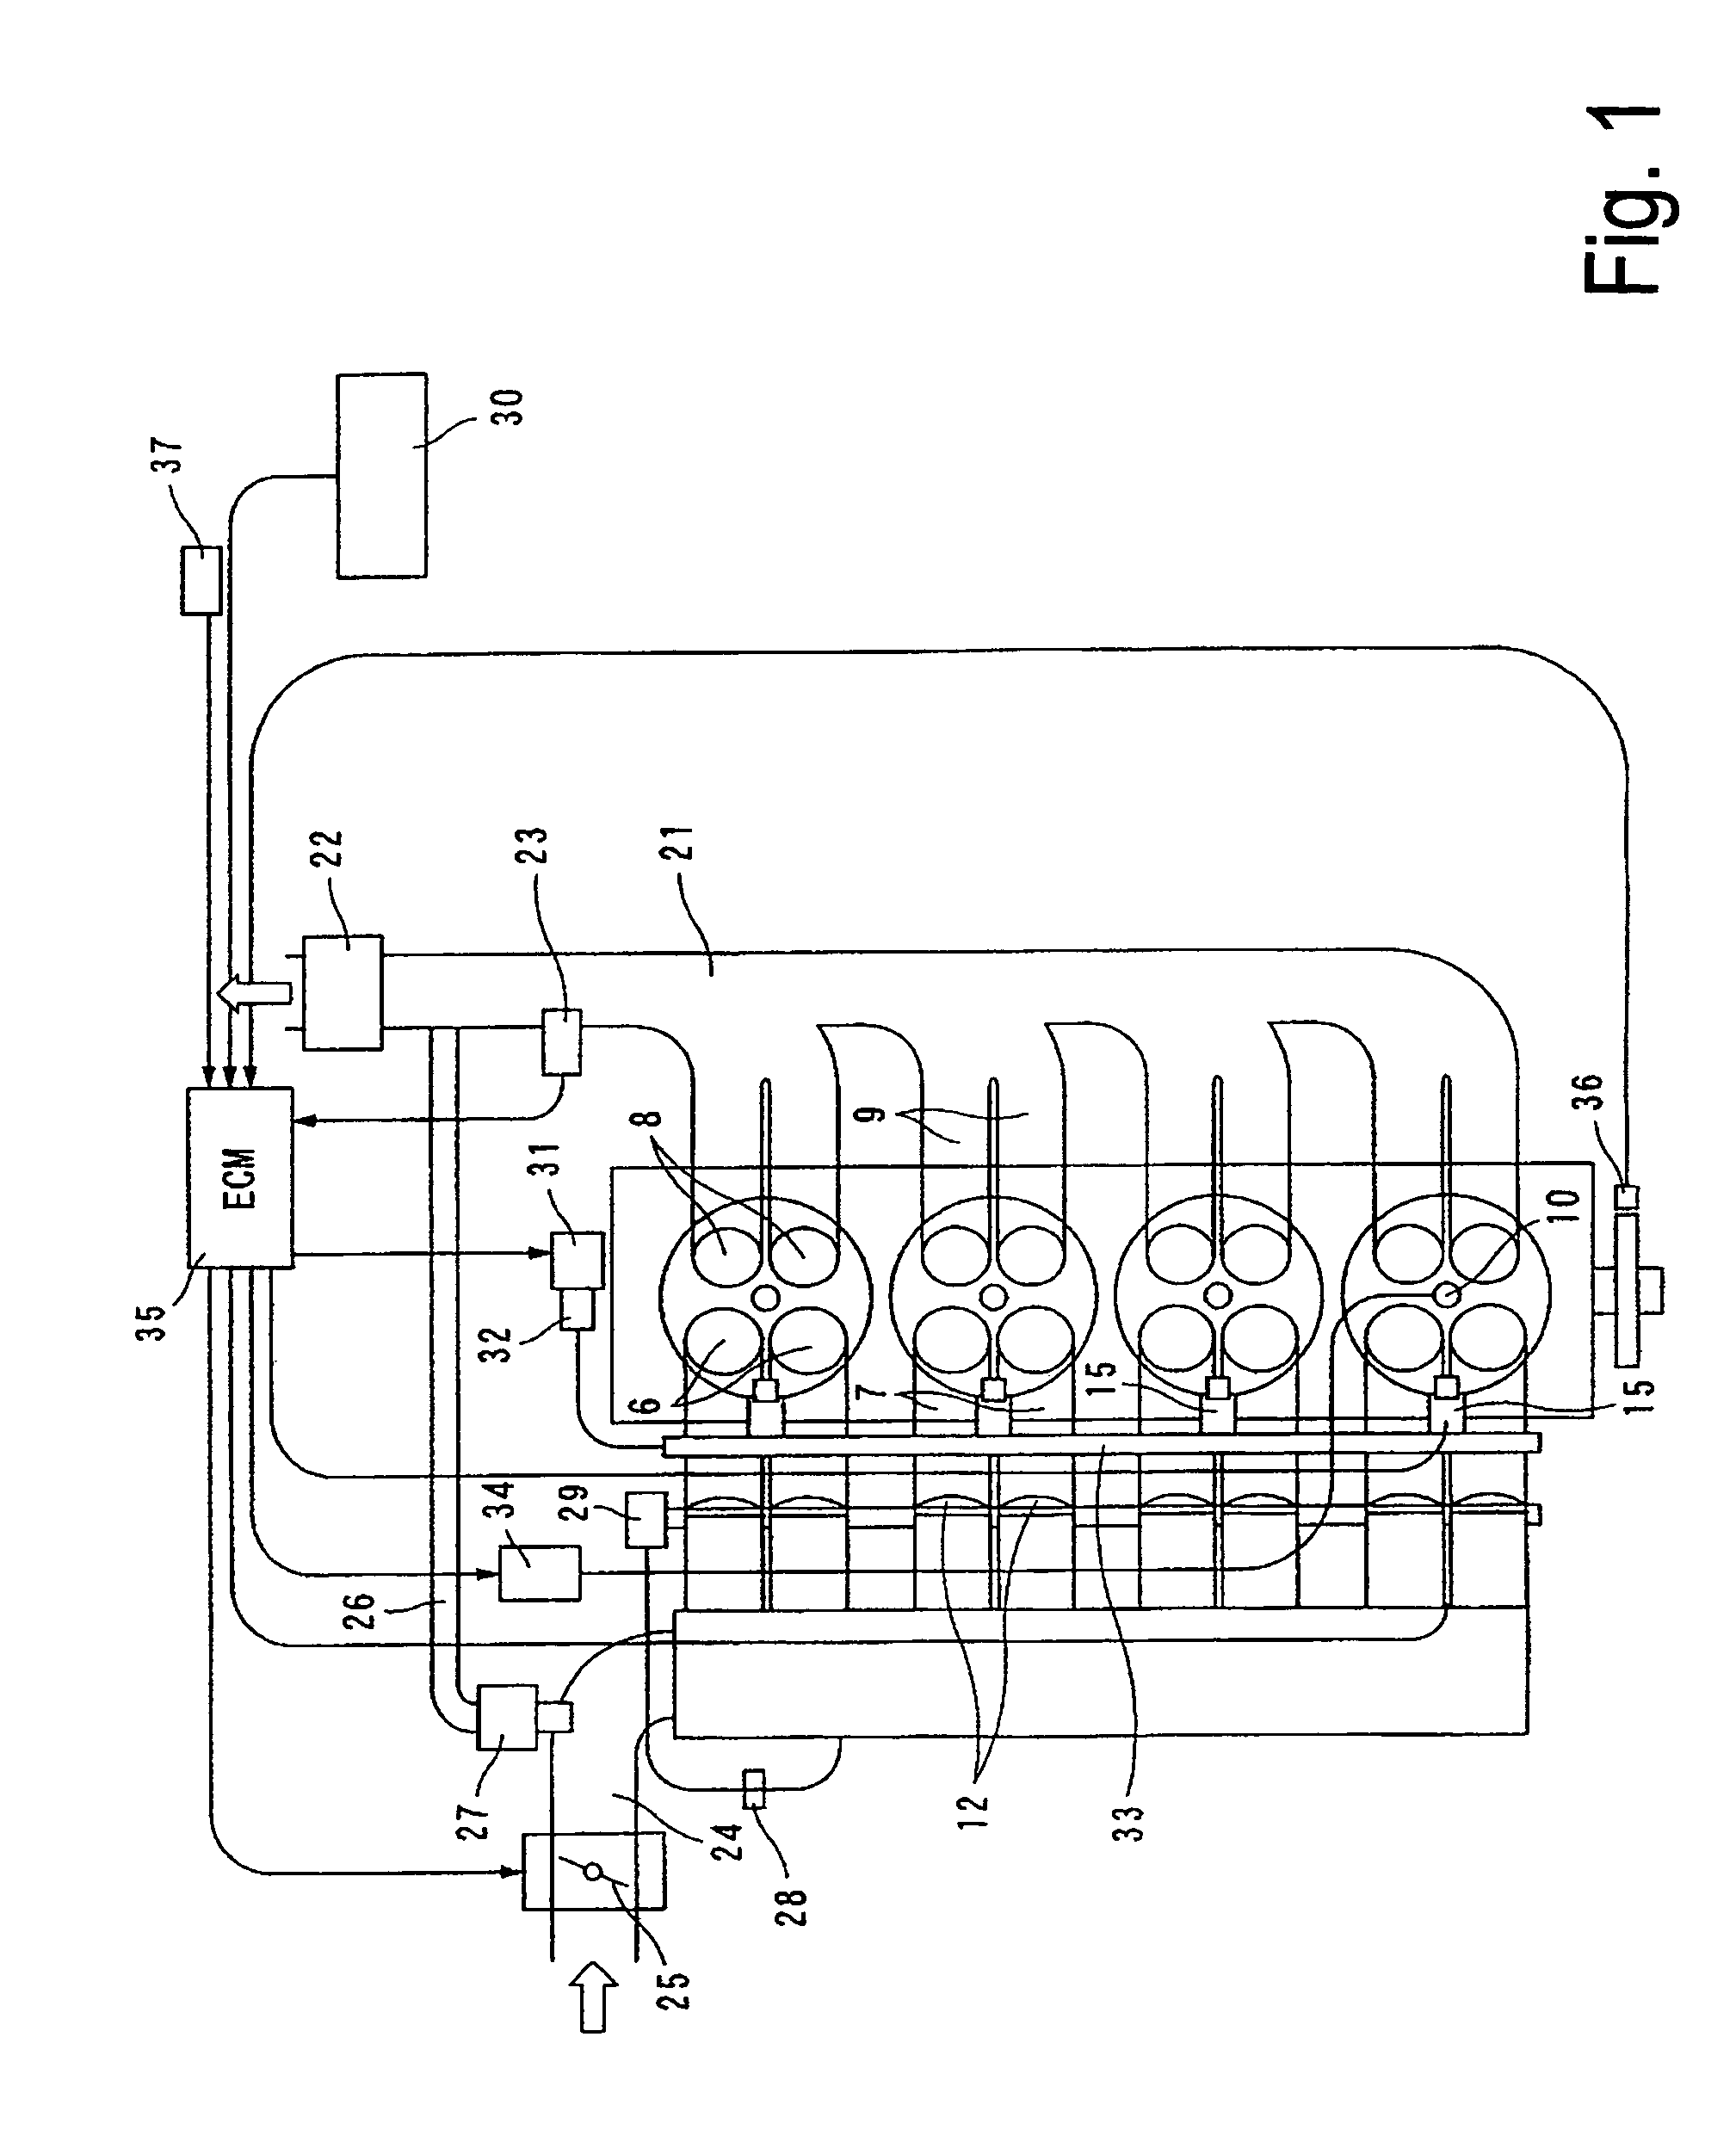 Direct fuel injection/spark ignition engine control device